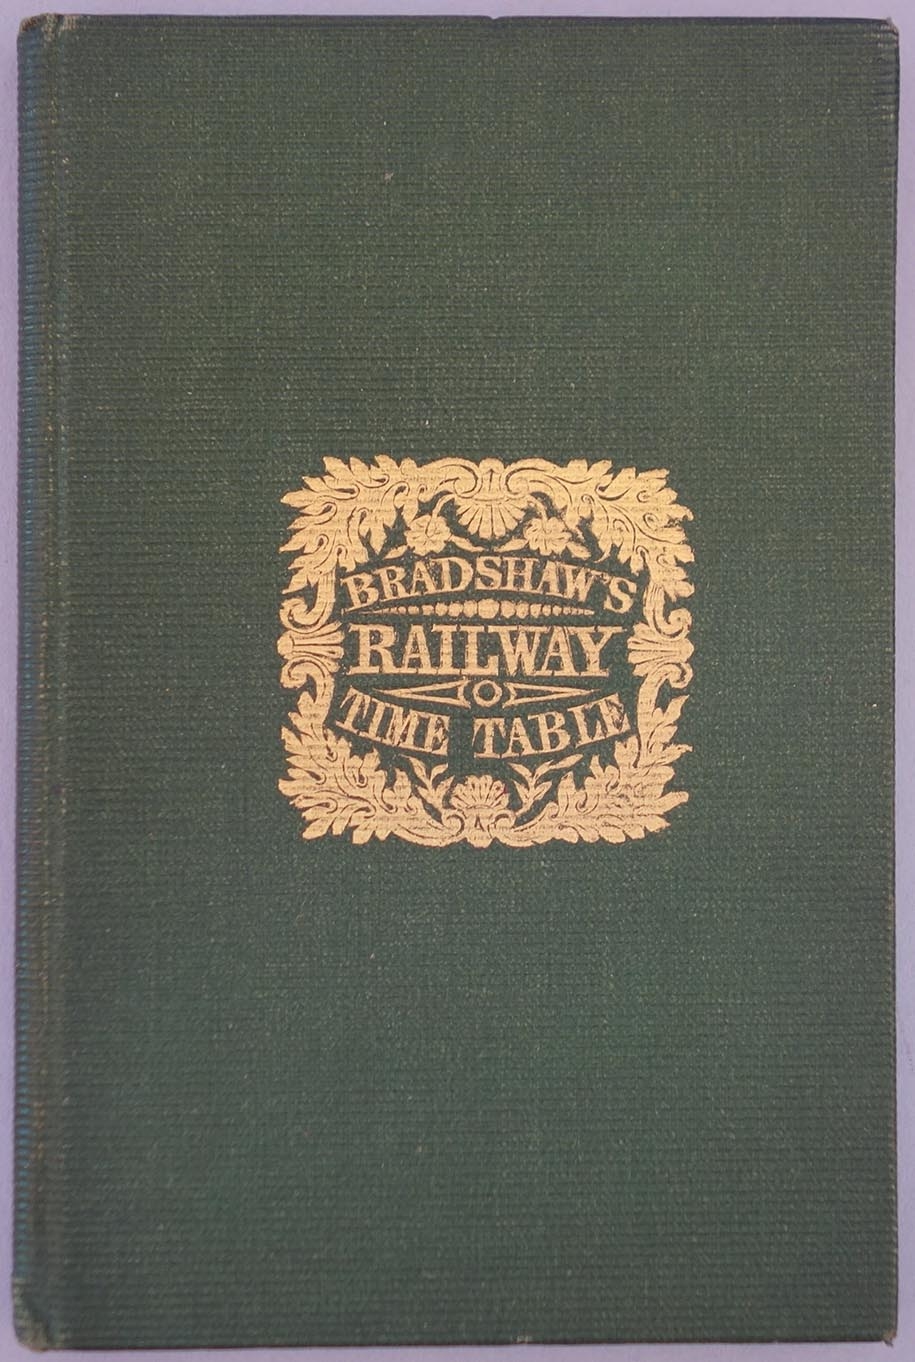 Binding on the first edition of Bradshaw. The timetables were issued in a pocket 12mo format.